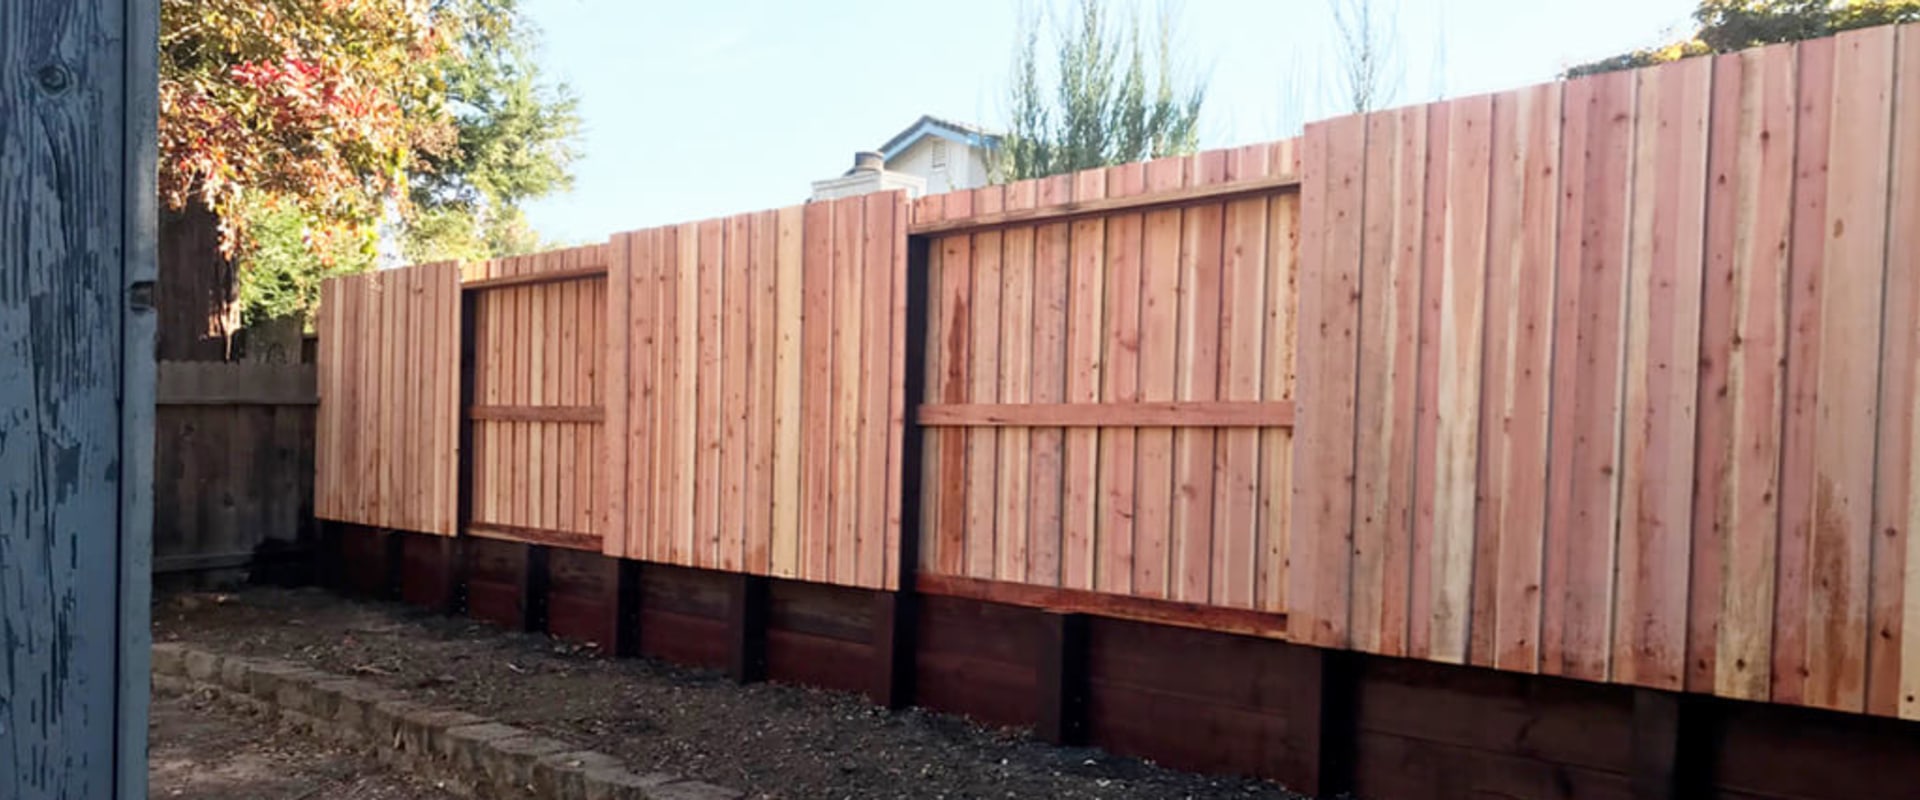 Do you need a fence around a retaining wall?